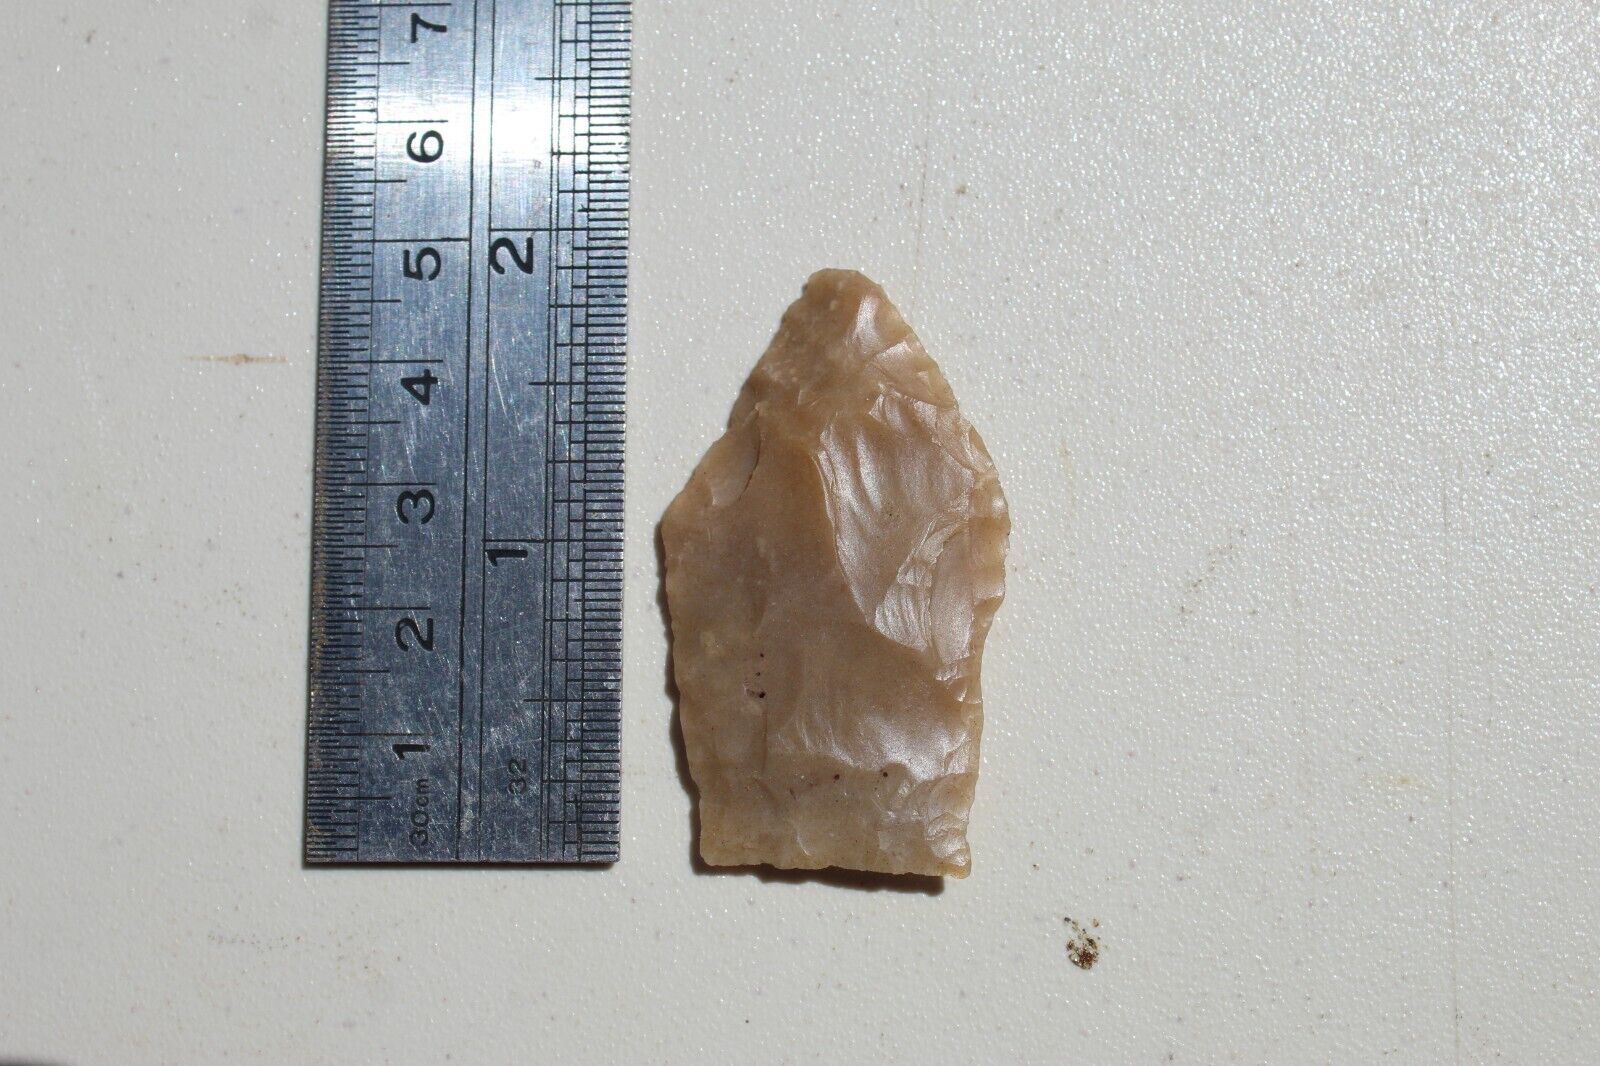 Authentic Hell Gap projectile point found in Cochran county texas